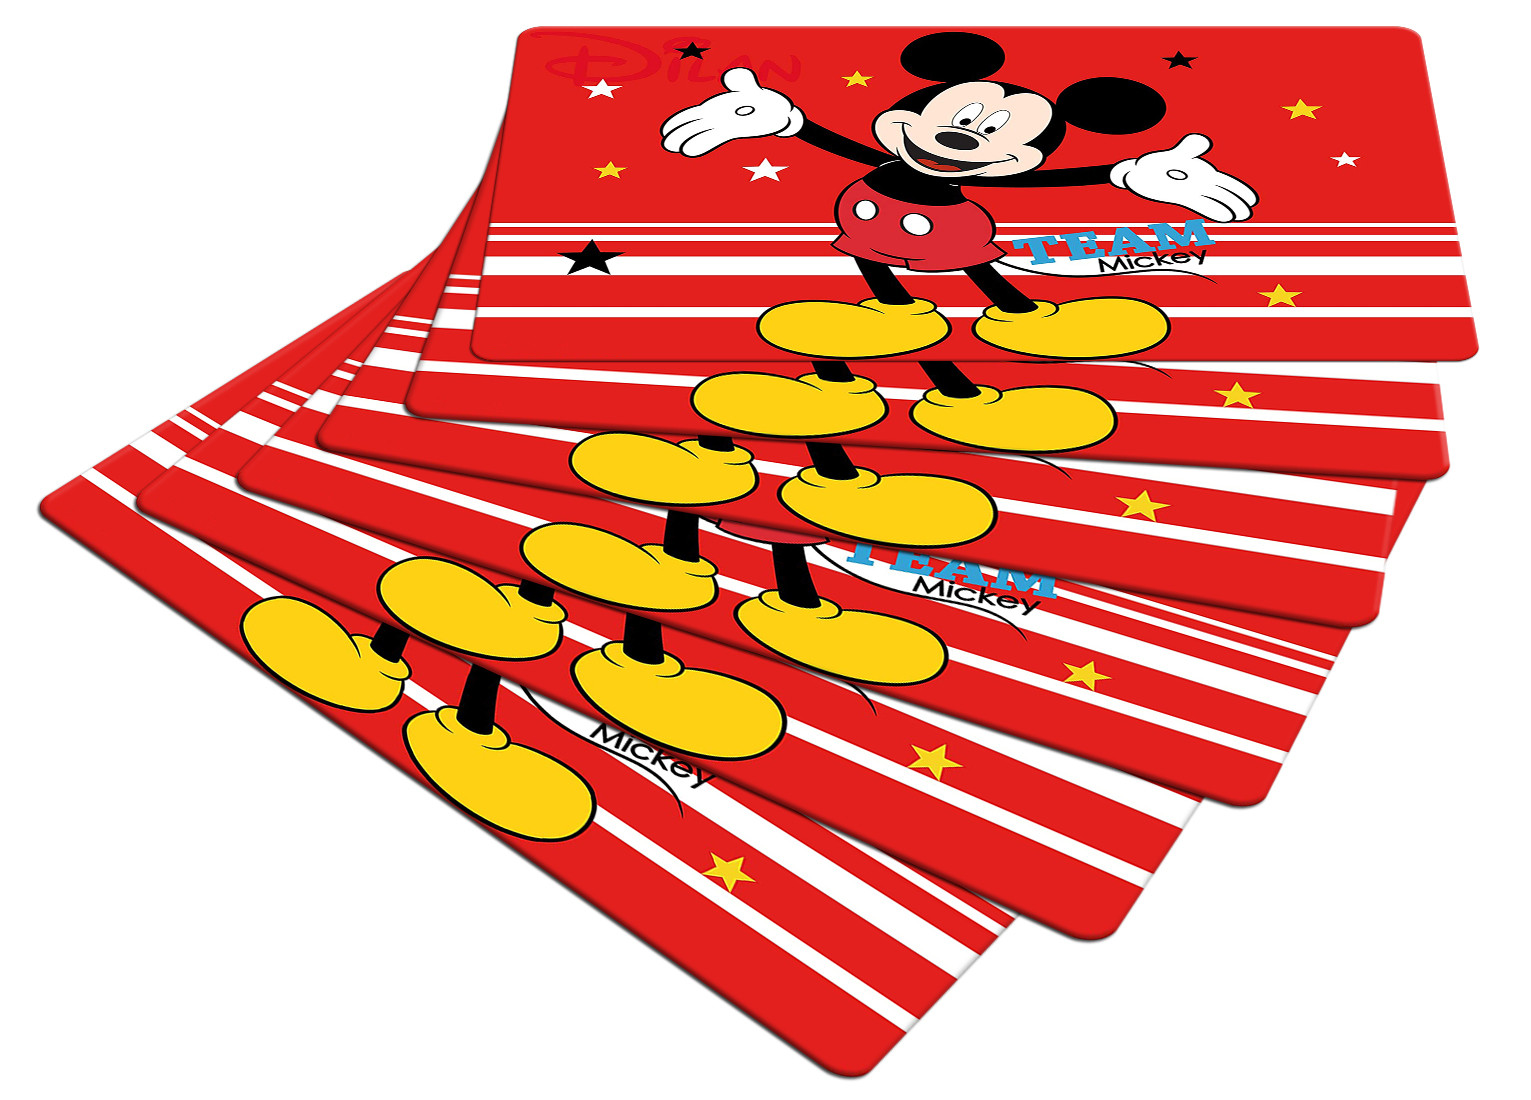 Kuber Industries Multiuses Mickey Mouse Print PVC Table Placemat With 6 Coasters for kitchen, Dining Table Set of 6 (Red)